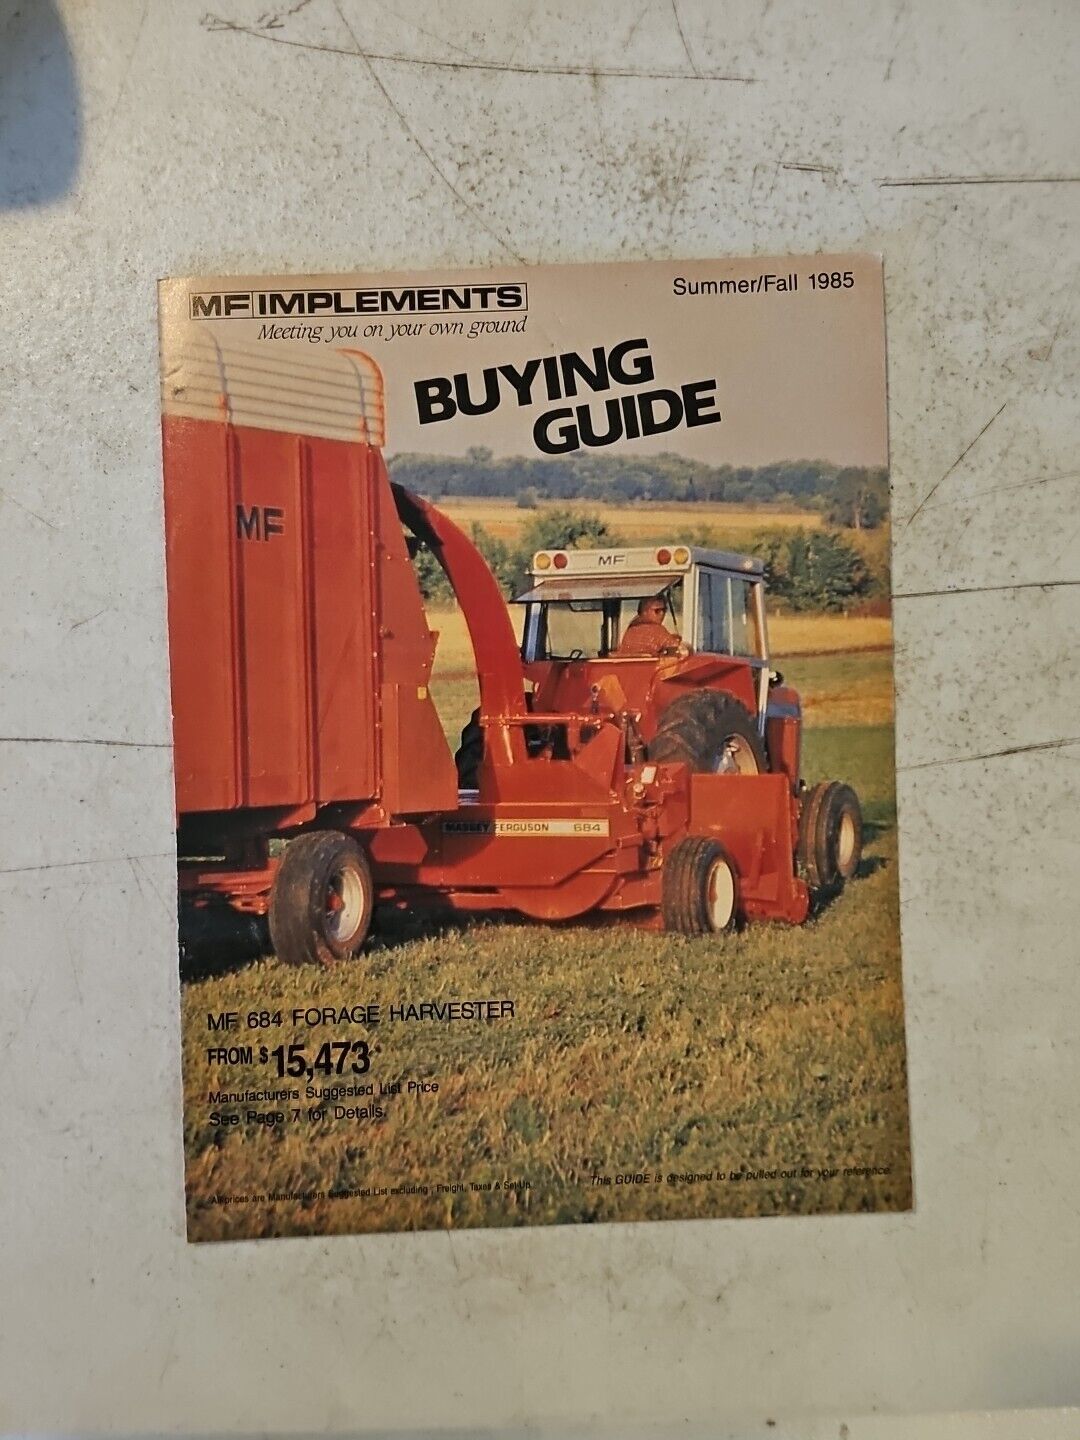 Vintage Massey Ferguson Implements Buying Guide Summer/Fall 1985